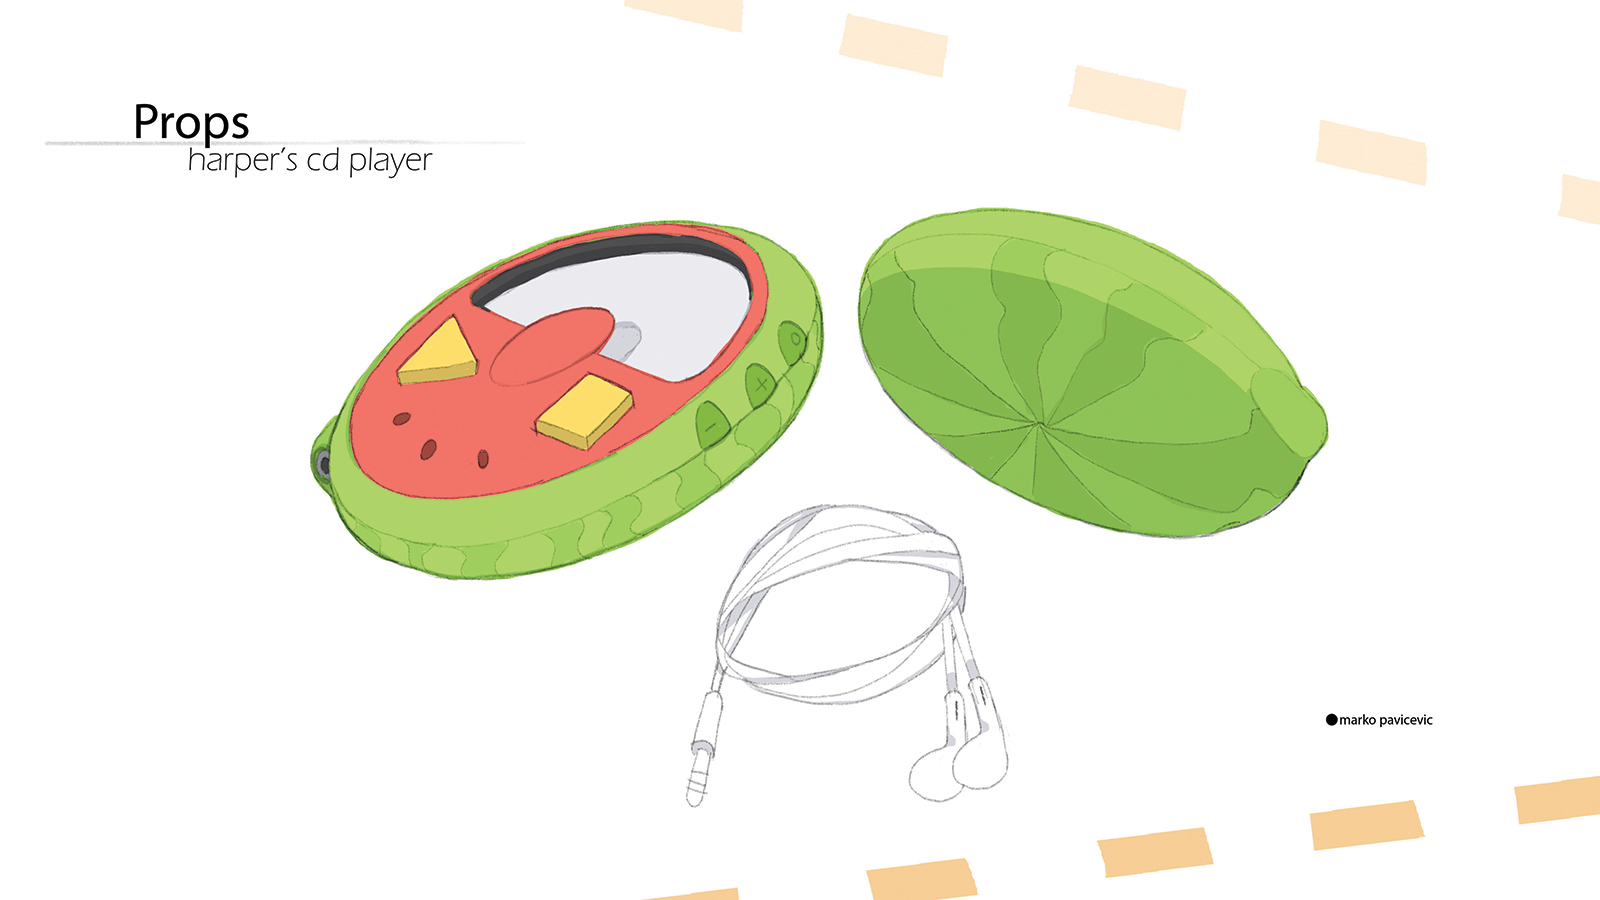 Sketch of a child's portable CD player.